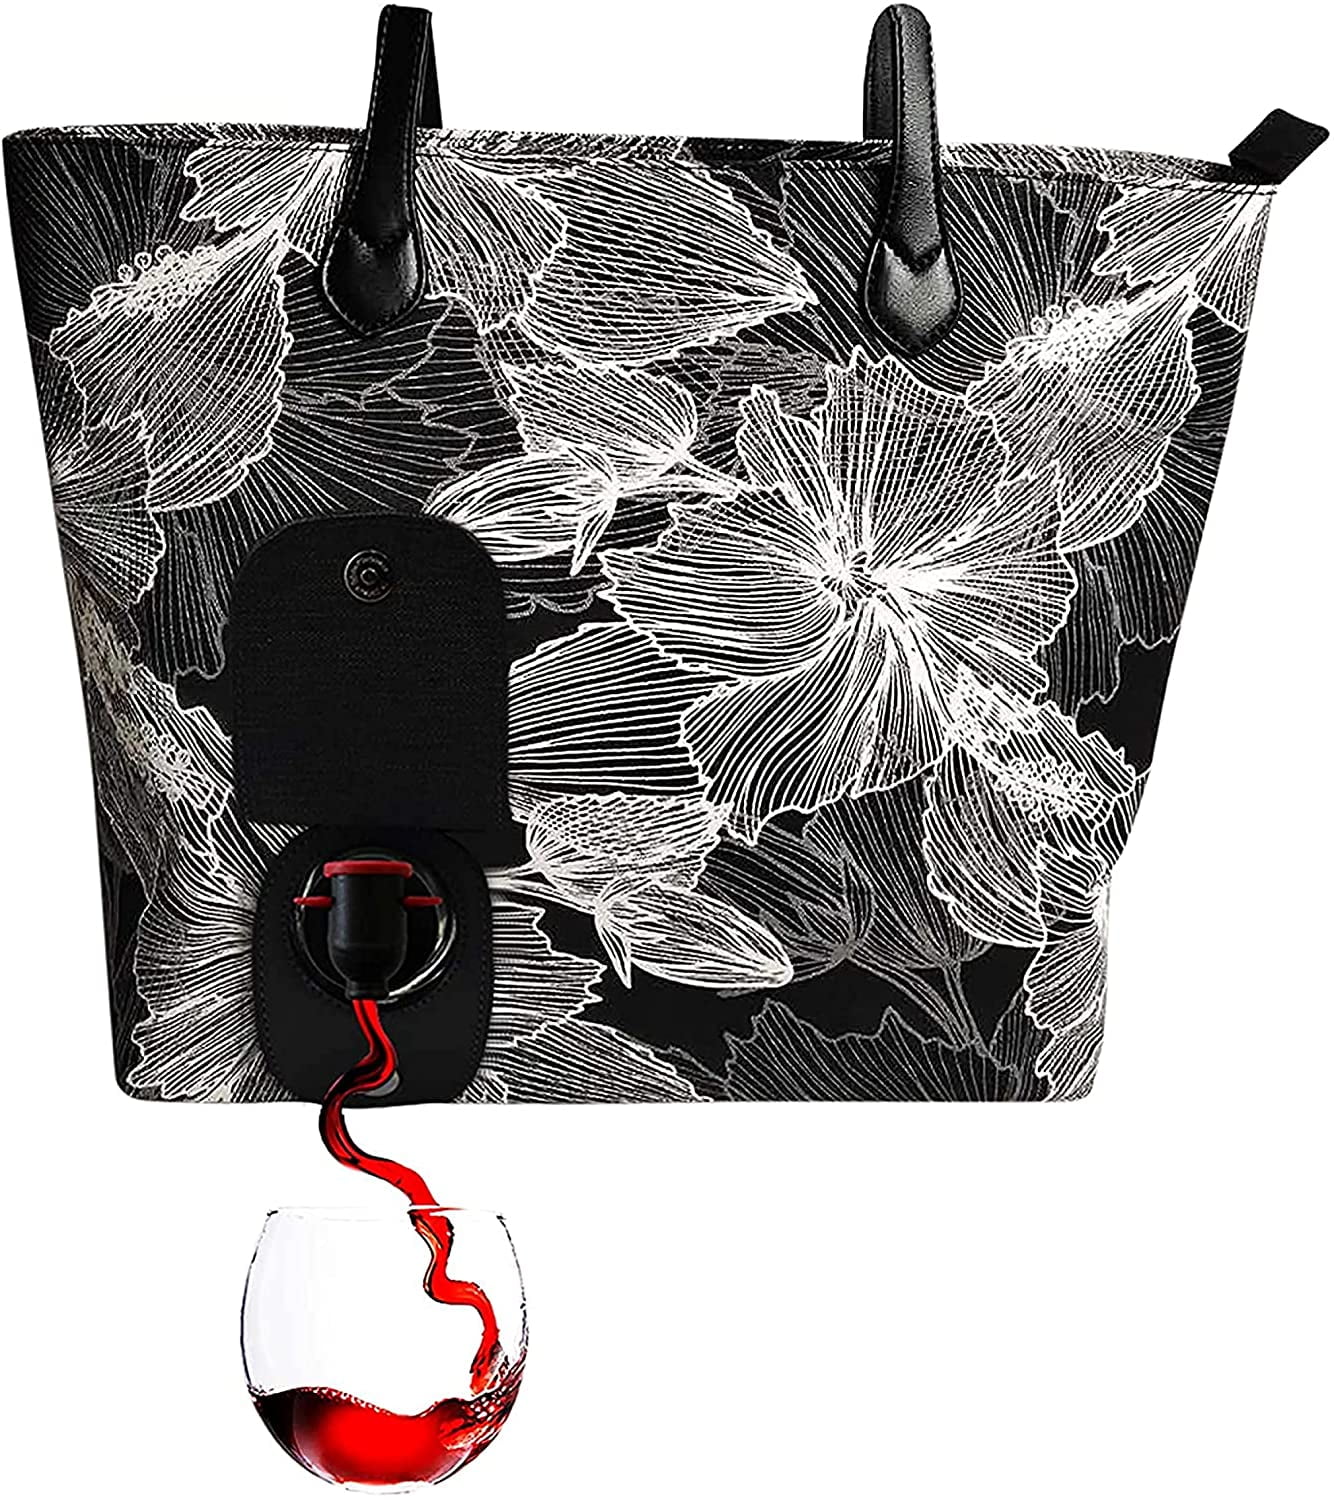 PortoVino Wine Tote - Fashionable Handbag With Hidden Insulated Compartment Holds 2 Bottles Of Wine! Black